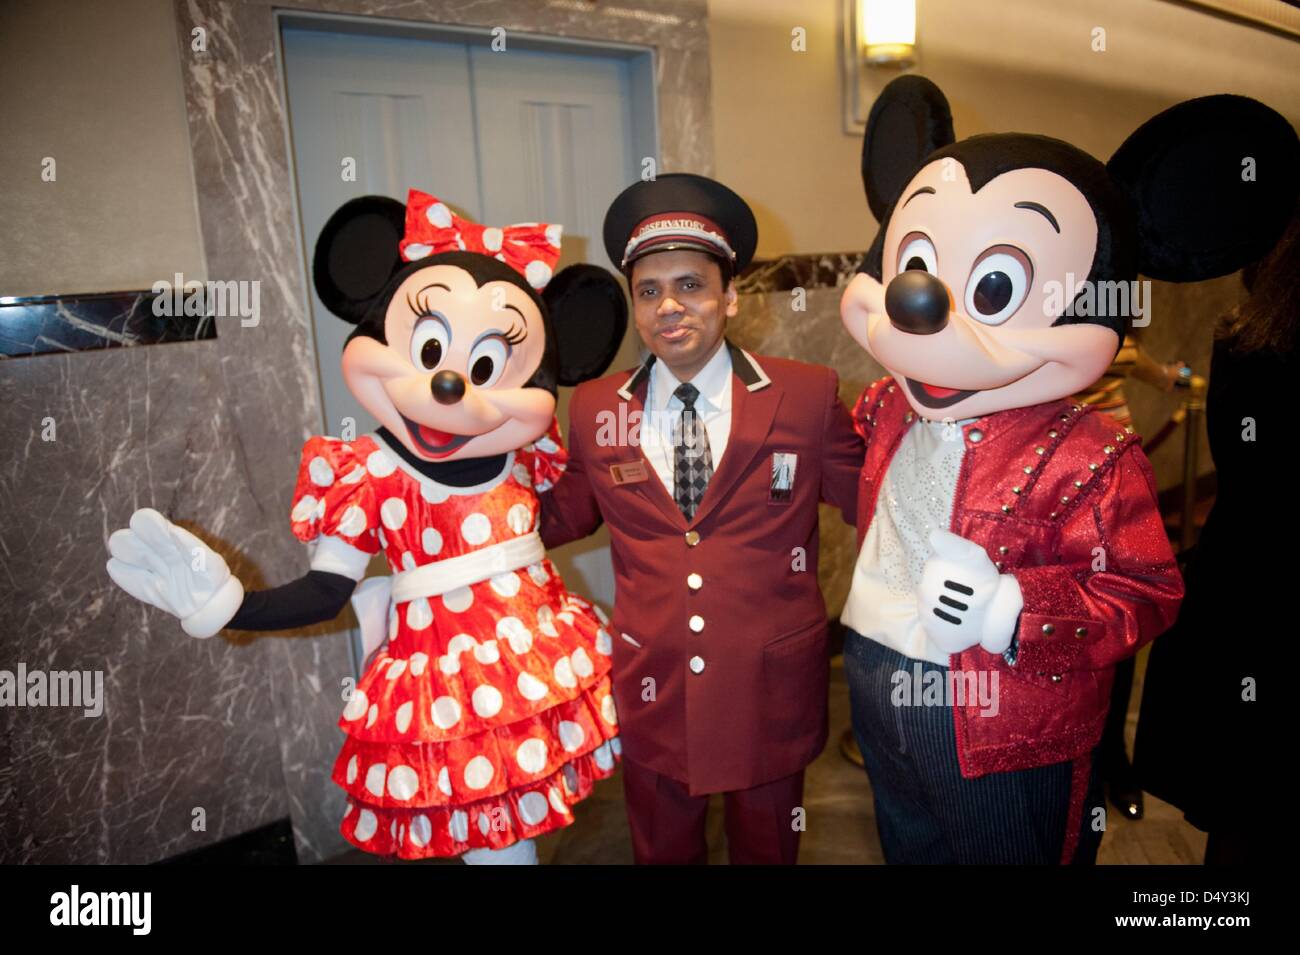 March 20, 2013 - Manhattan, New York, U.S. - MICKEY MOUSE and MINNIE MOUSE,stars of ''Disney Live! Mickey's Music Festival'', visit the Empire State Building's 86th floor Observatory, Wednesday, March 20, 2013. (Credit Image: © Bryan Smith/ZUMAPRESS.com) Stock Photo